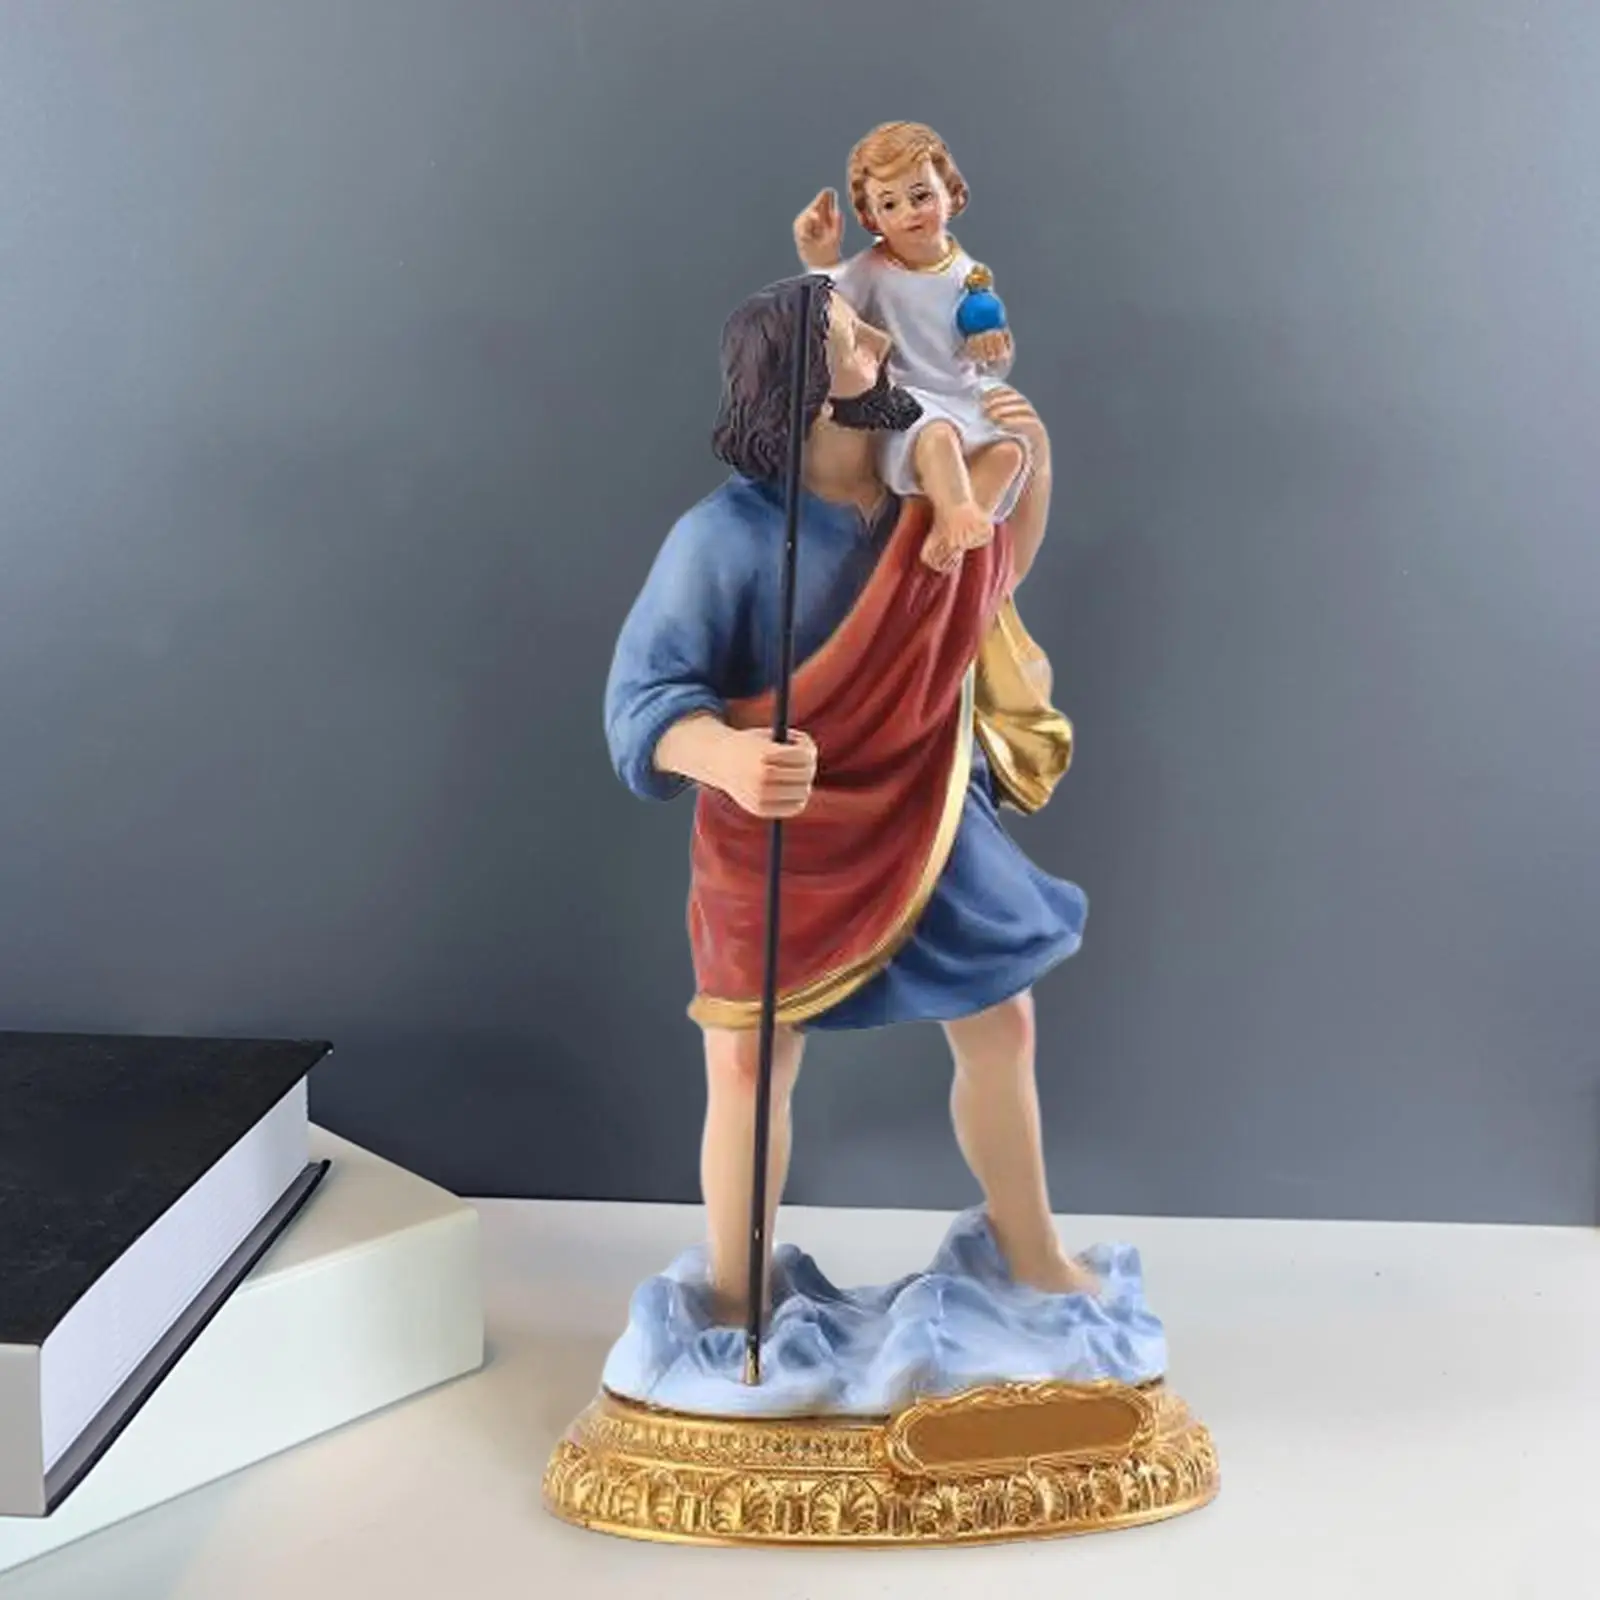 Resin ST. Joseph with Child Jesus Statues Religious Decor Church Ornament for Church Table Living Room Office Gifts